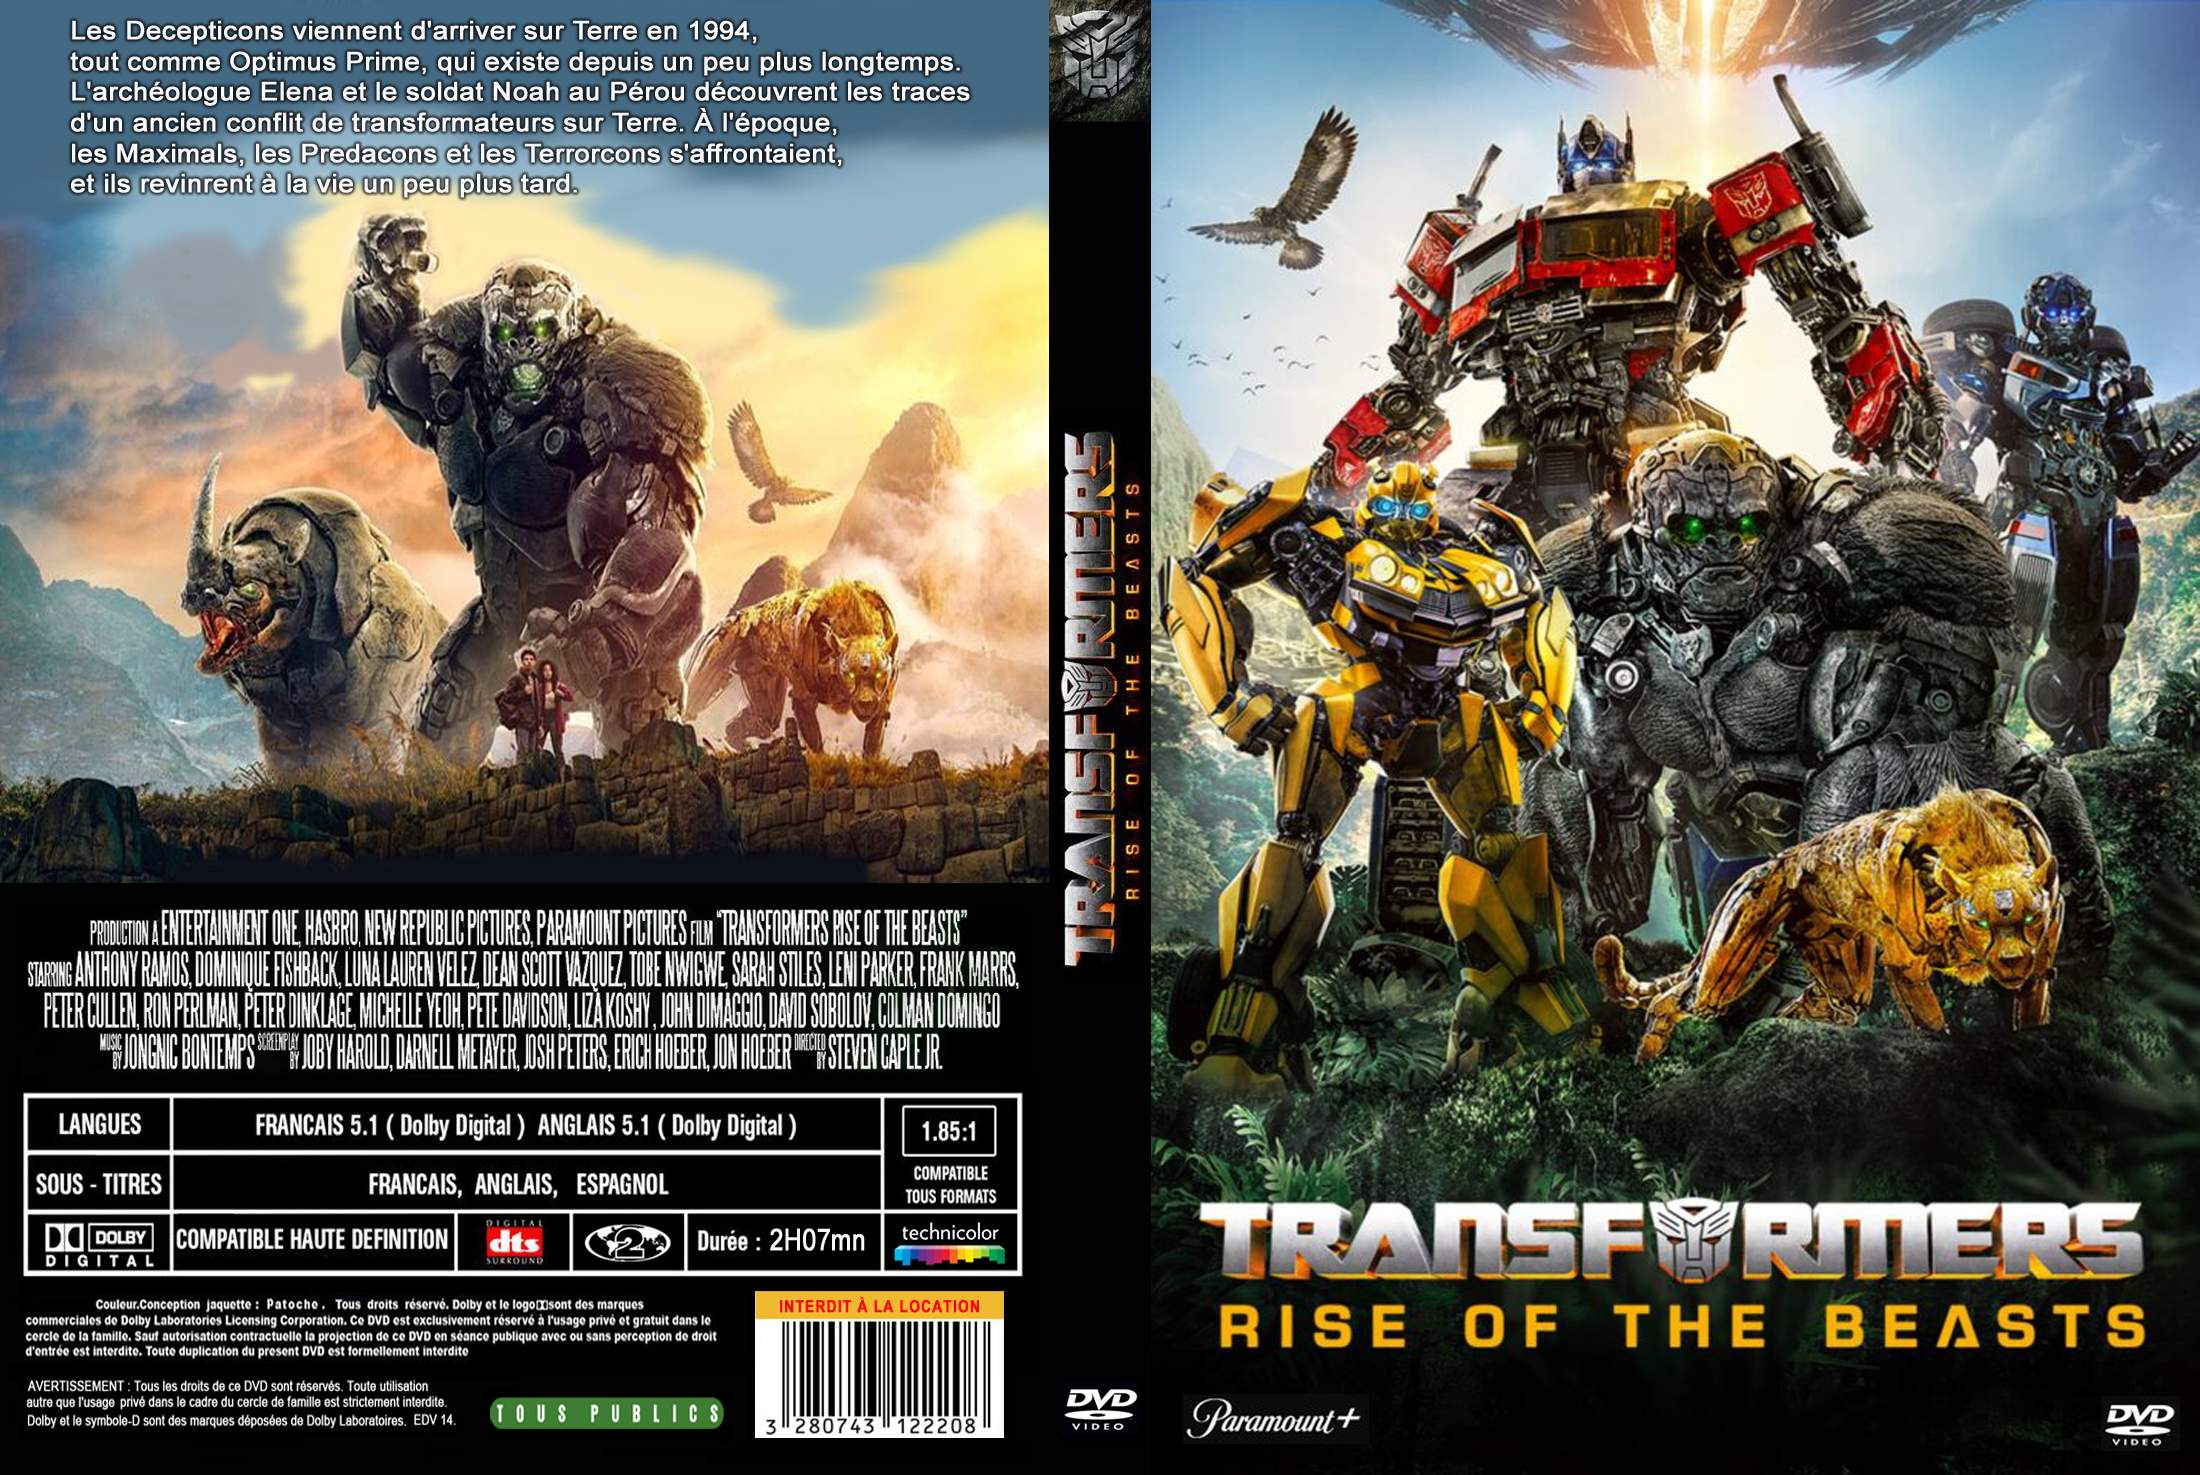 Jaquette DVD Transformers rise of the beasts custom